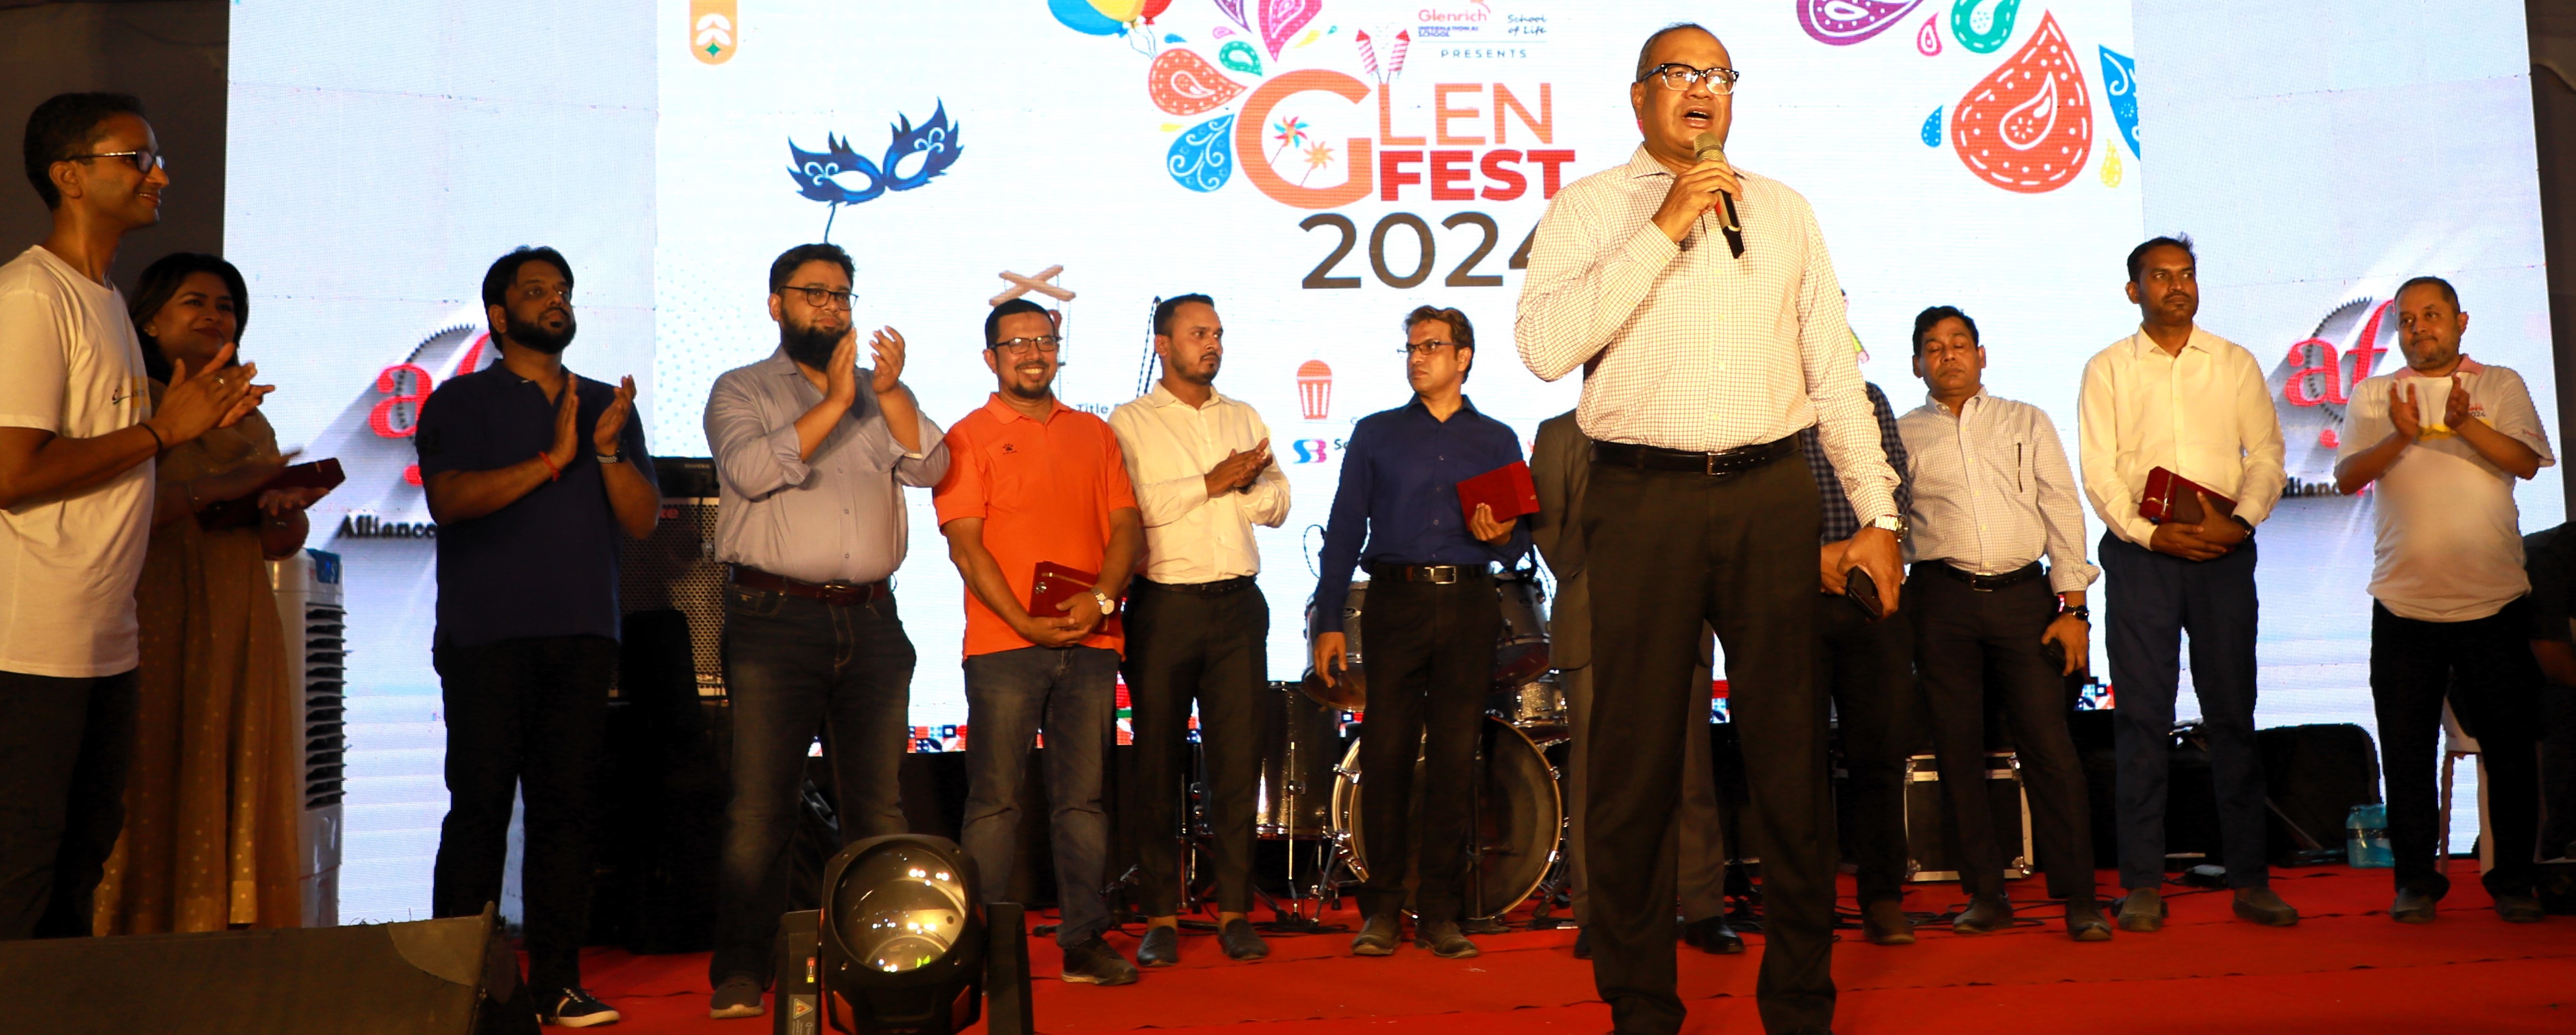 DPS STS School Dhaka’s transition to Glenrich Int’l School celebrated through GlenFest